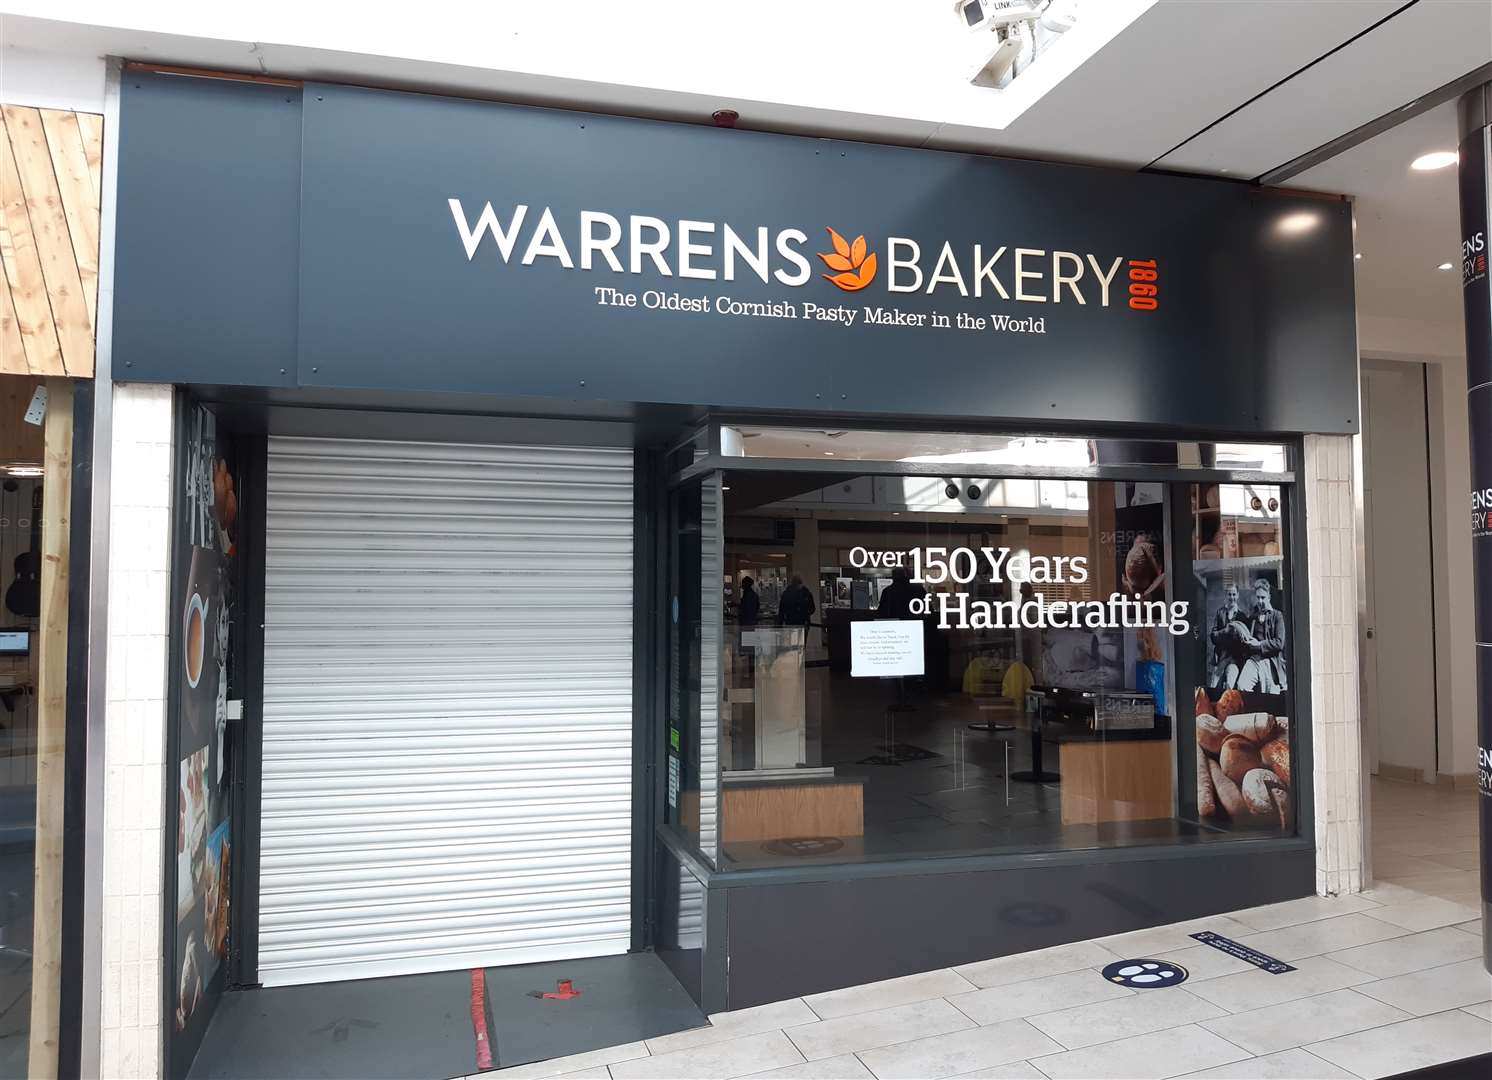 Warrens Bakery left the County Square shopping centre earlier this year